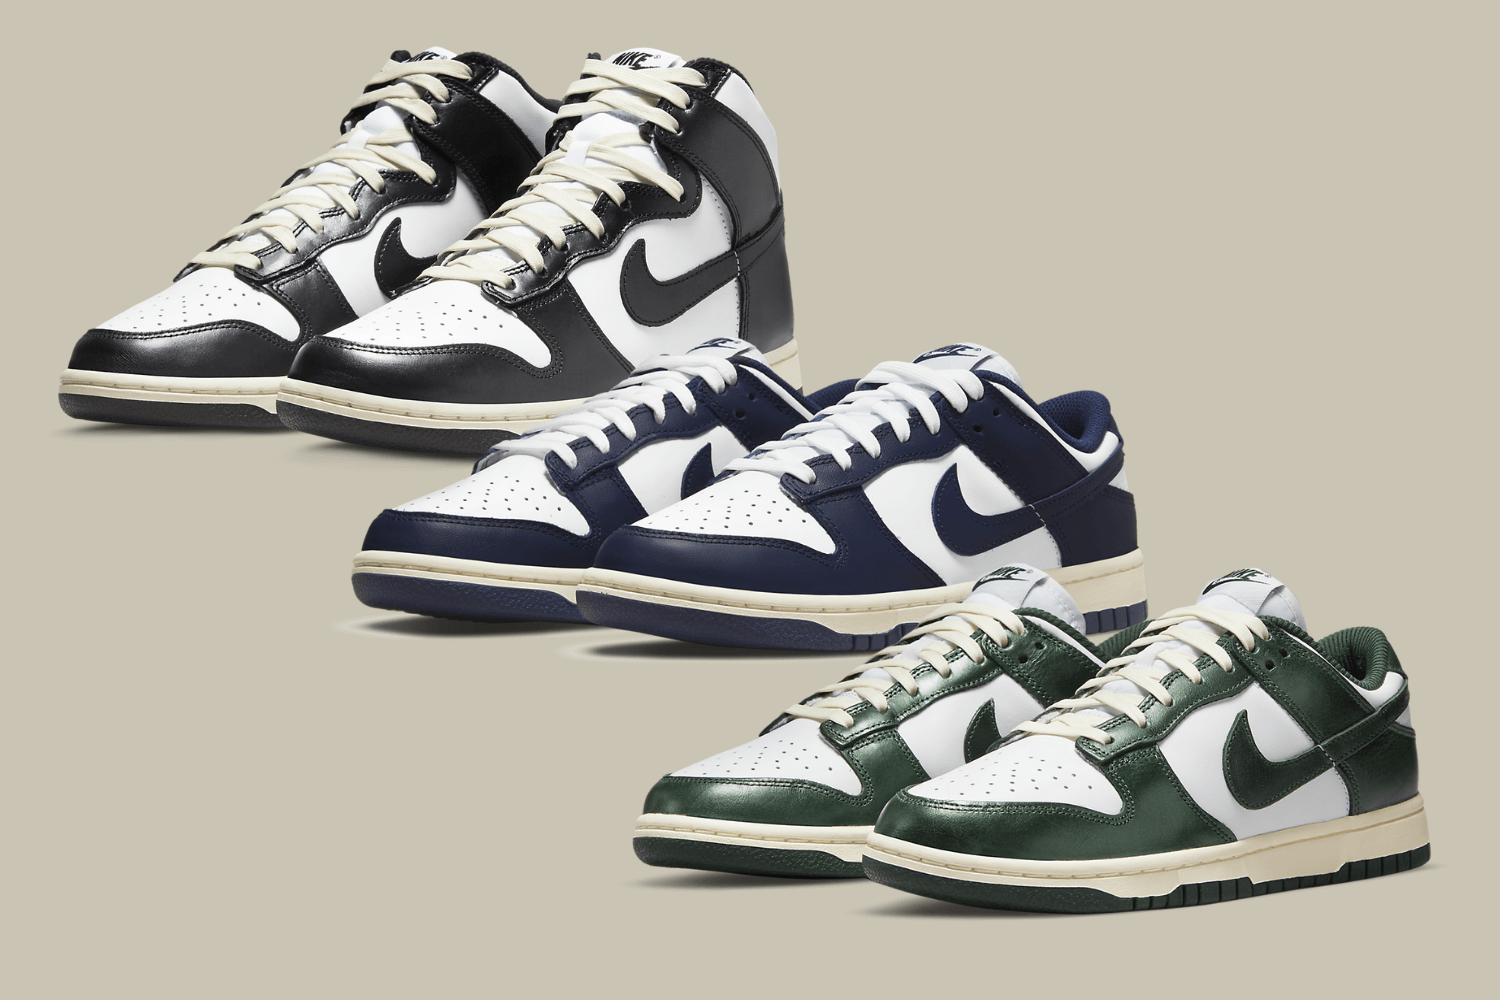 Nike releases Dunk Vintage Pack in 2022